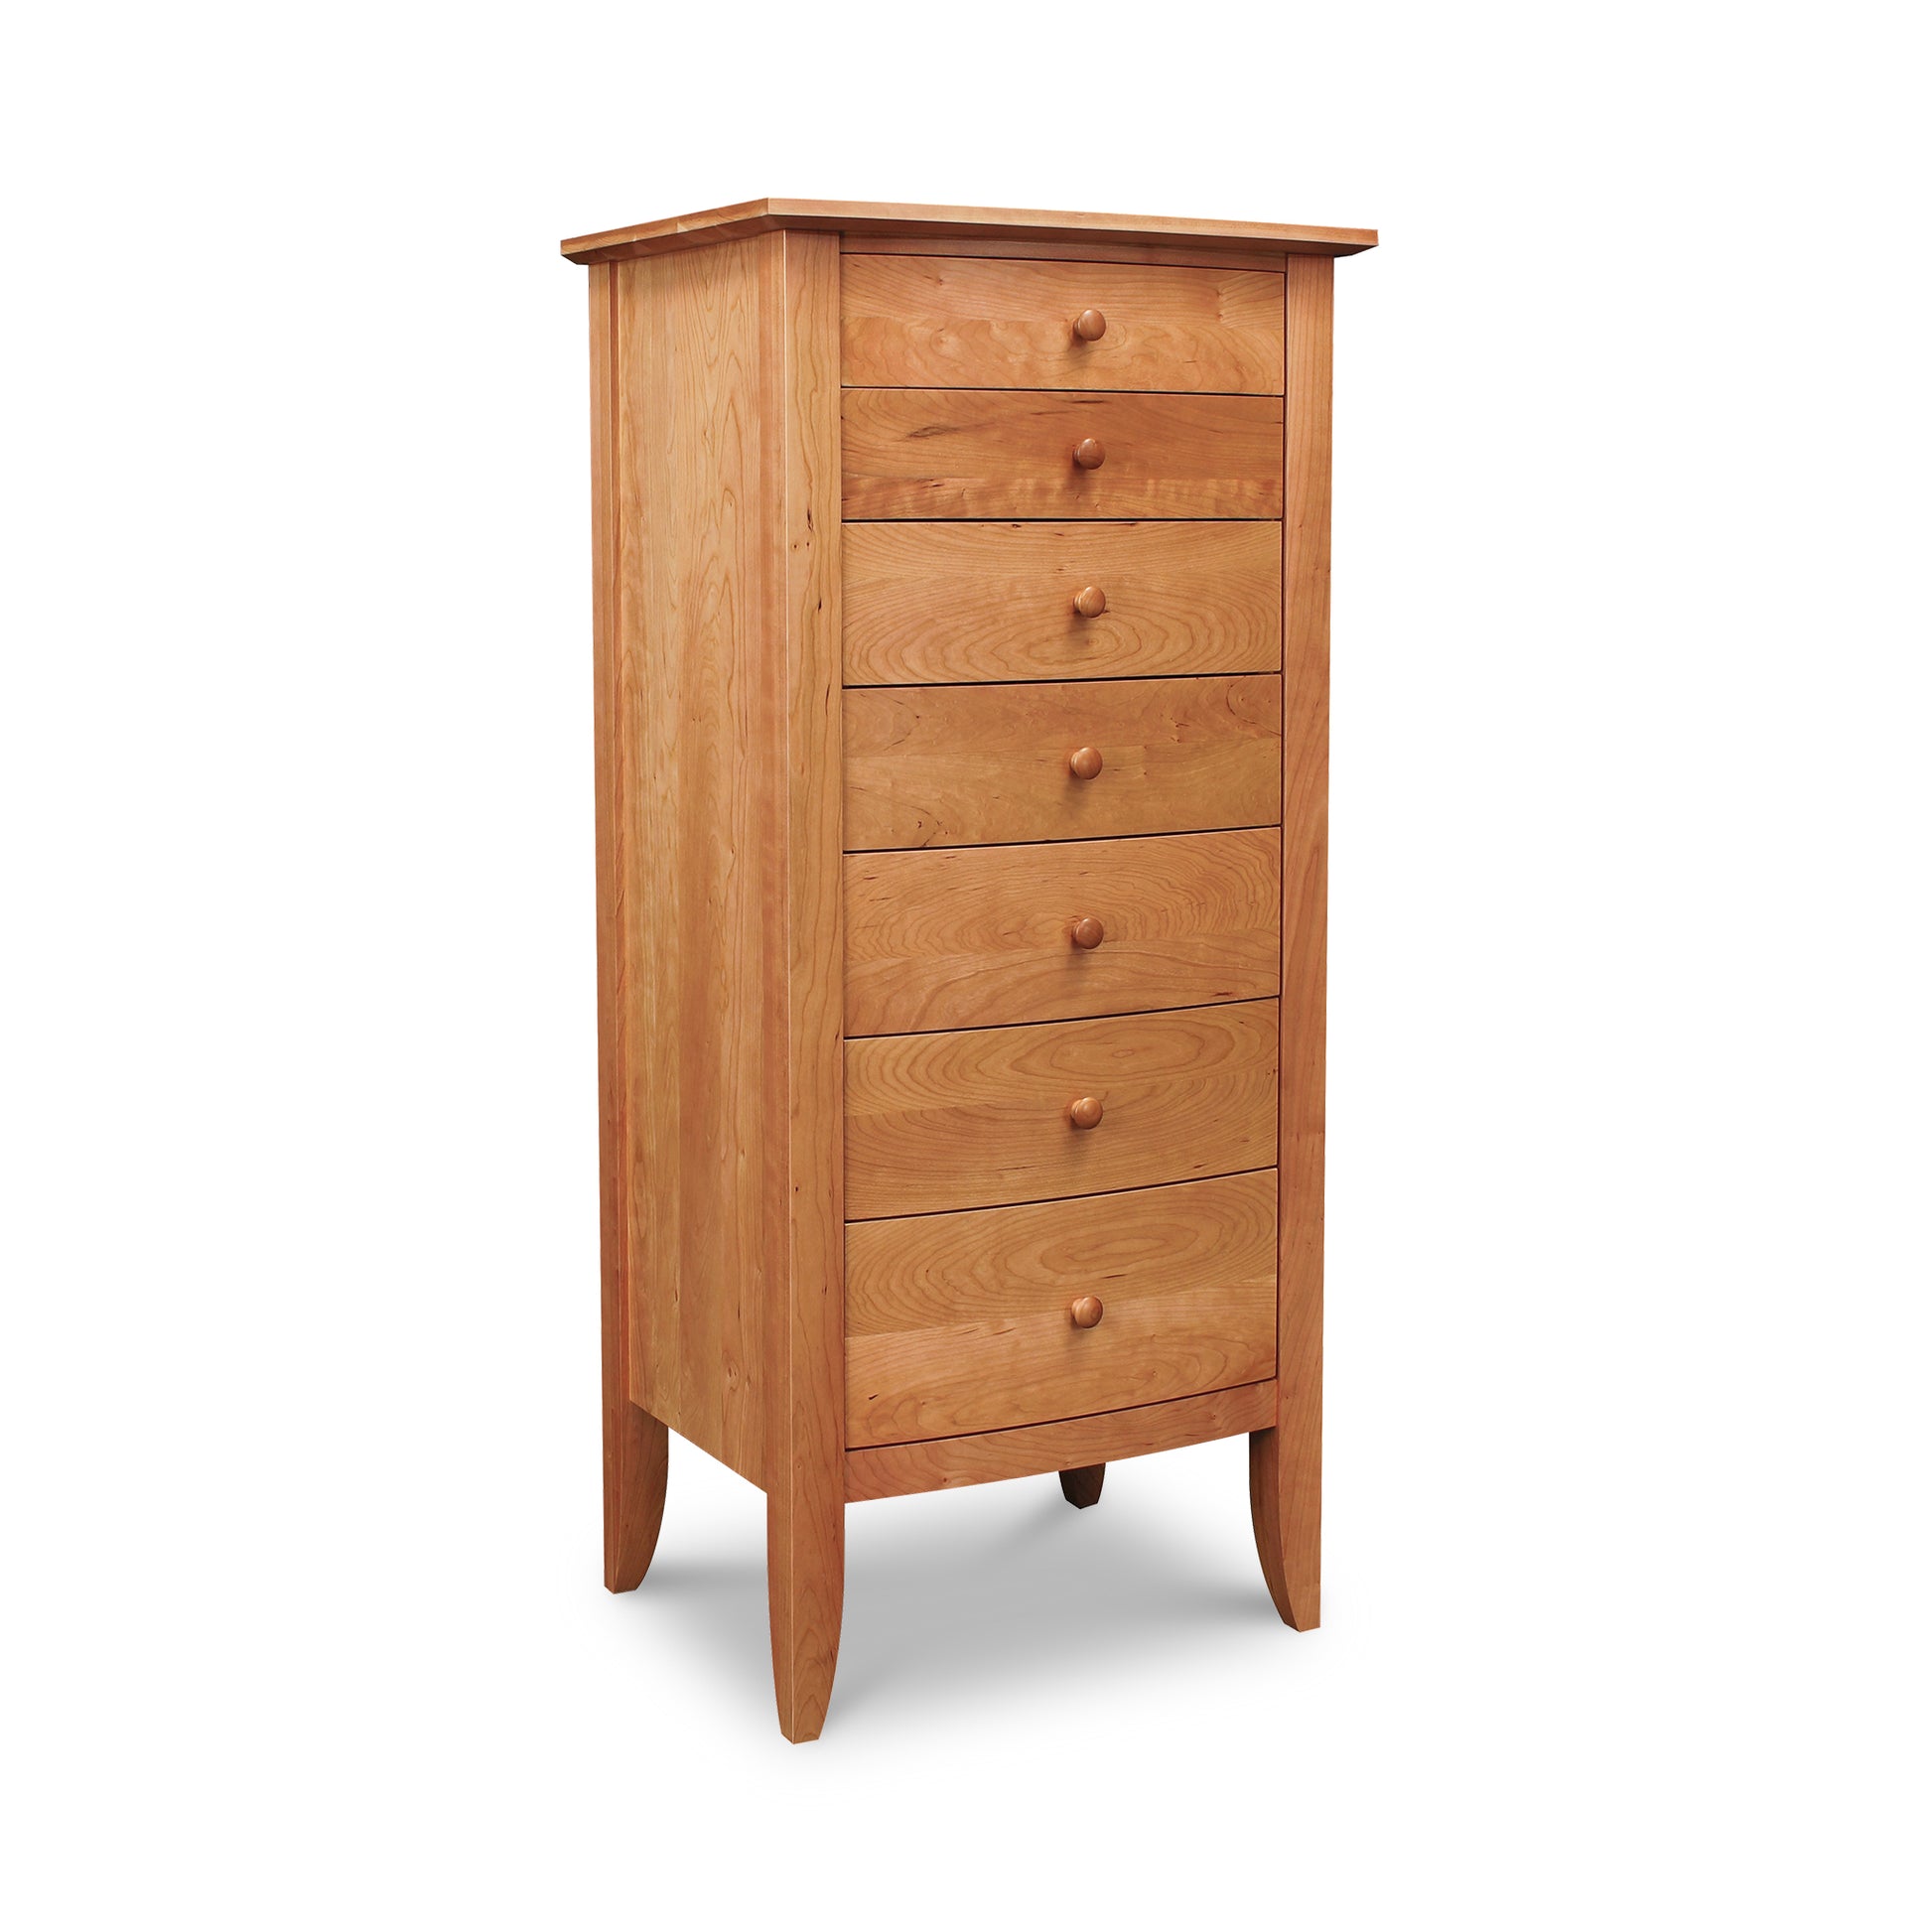 A space-saving, Lyndon Furniture Bow Front 7-Drawer Lingerie Chest with a 7-drawer configuration.